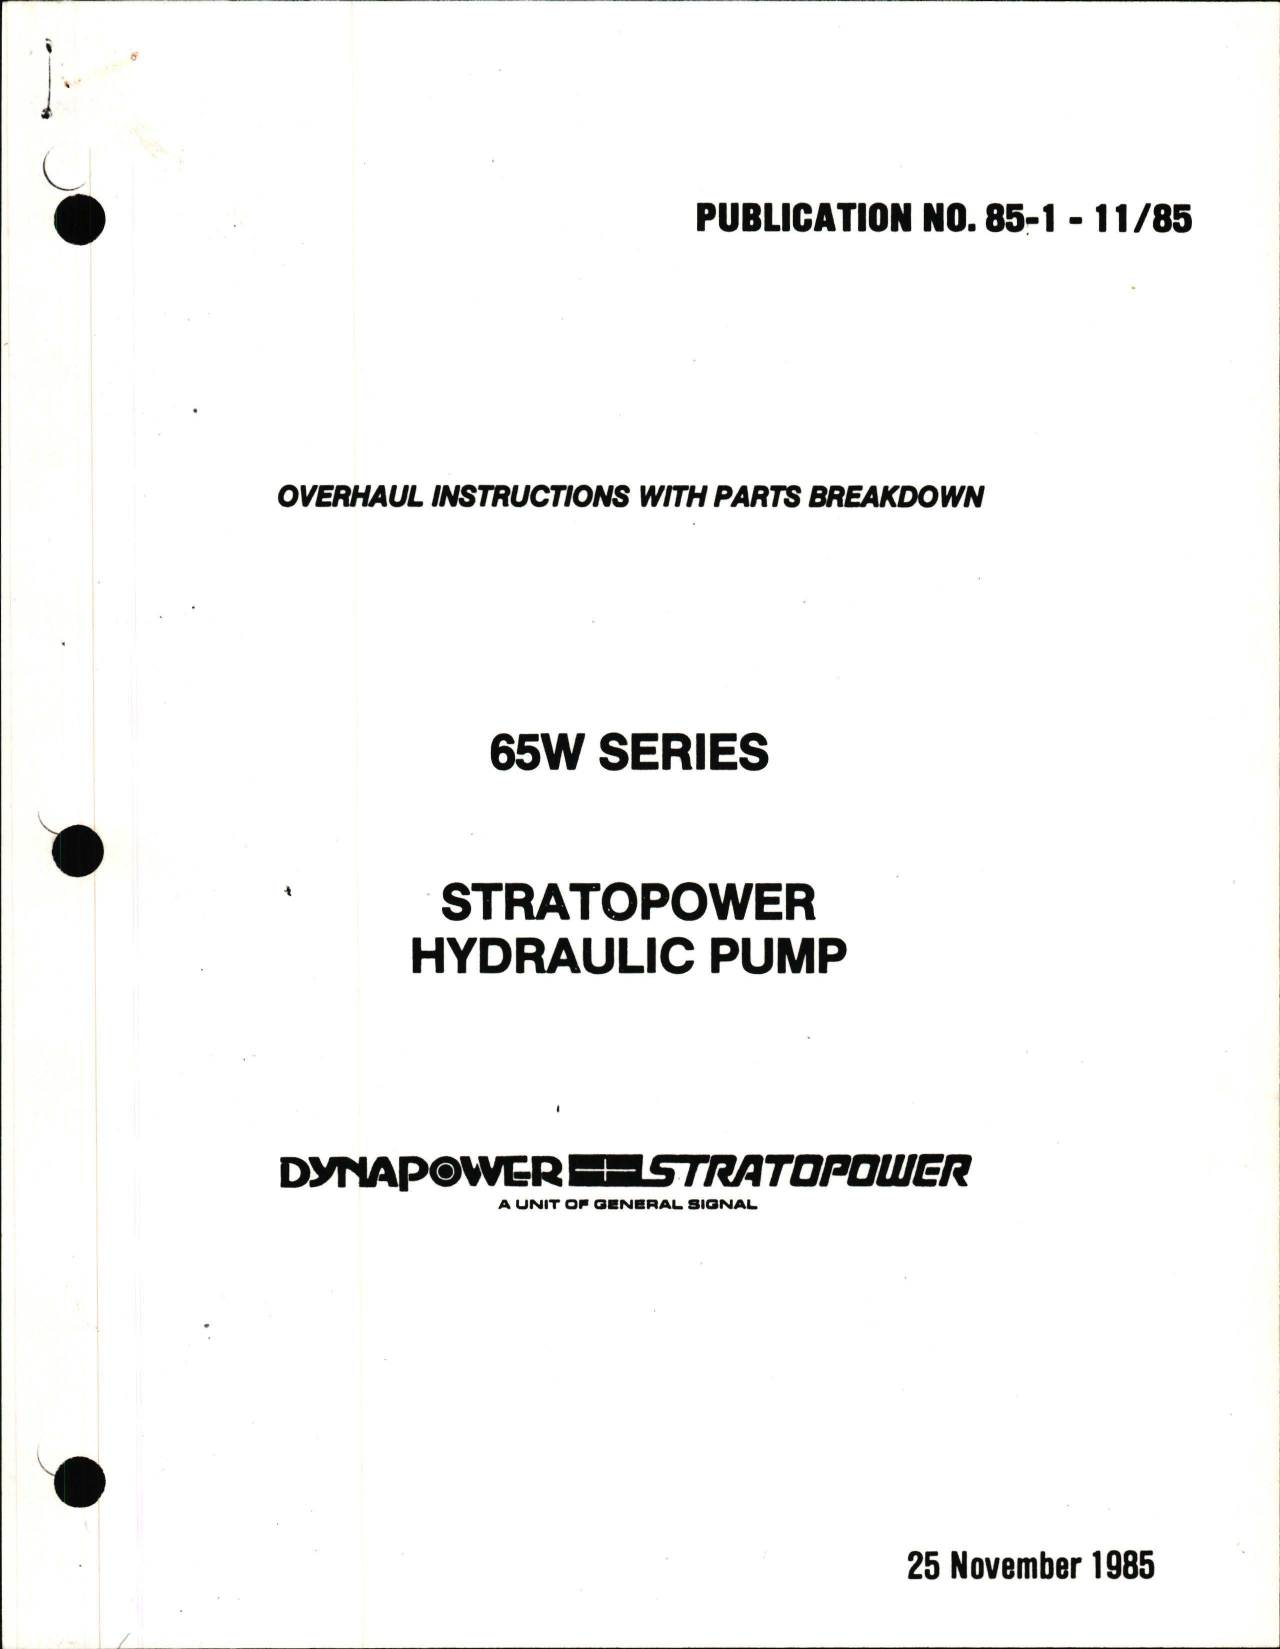 Sample page 1 from AirCorps Library document: Overhaul Instructions with Parts Breakdown for Stratopower Hydraulic Pump - 65W Series 